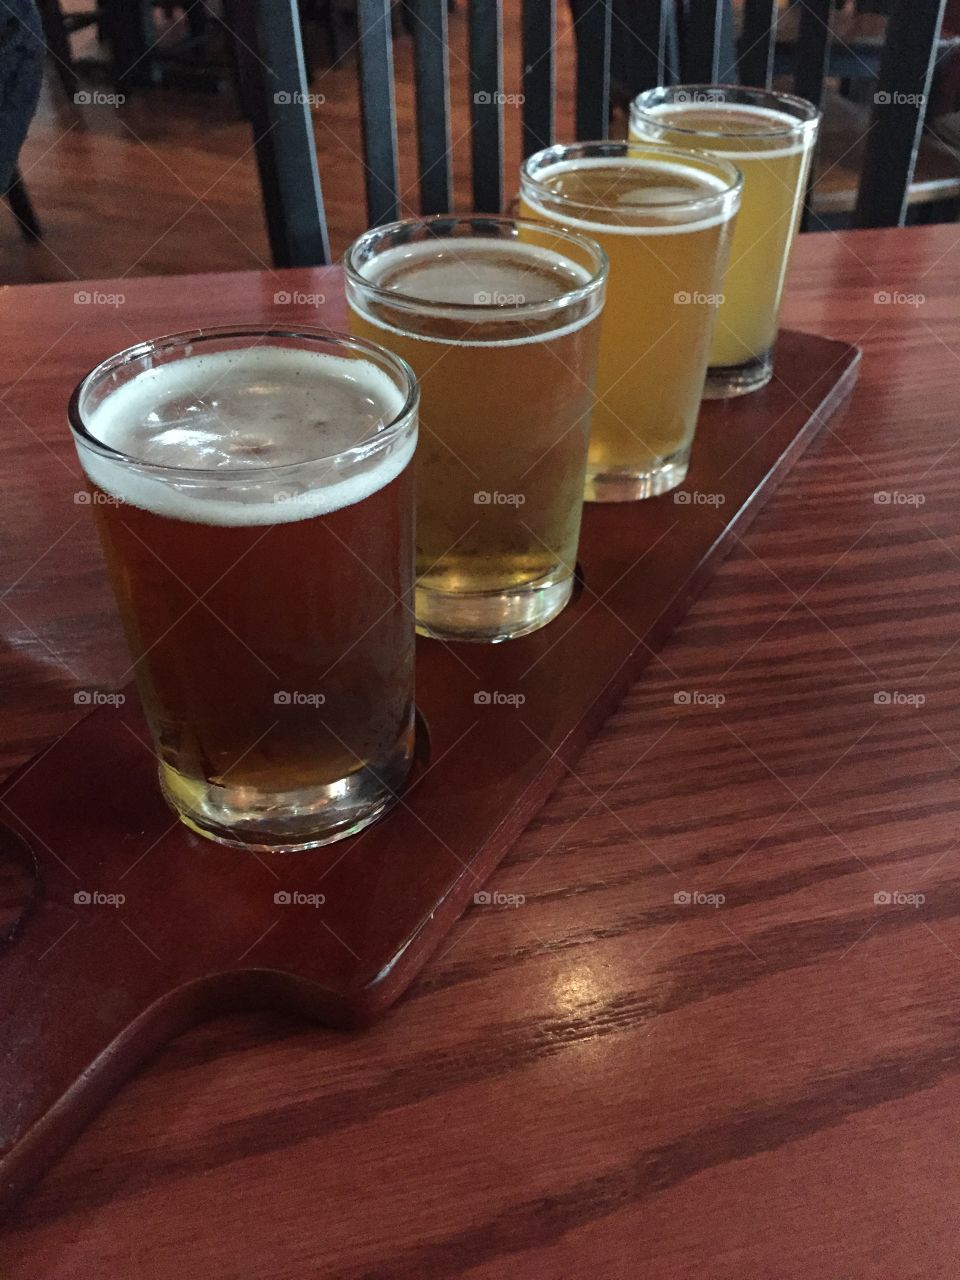 Beer tasting. 4 lagers from local brewers